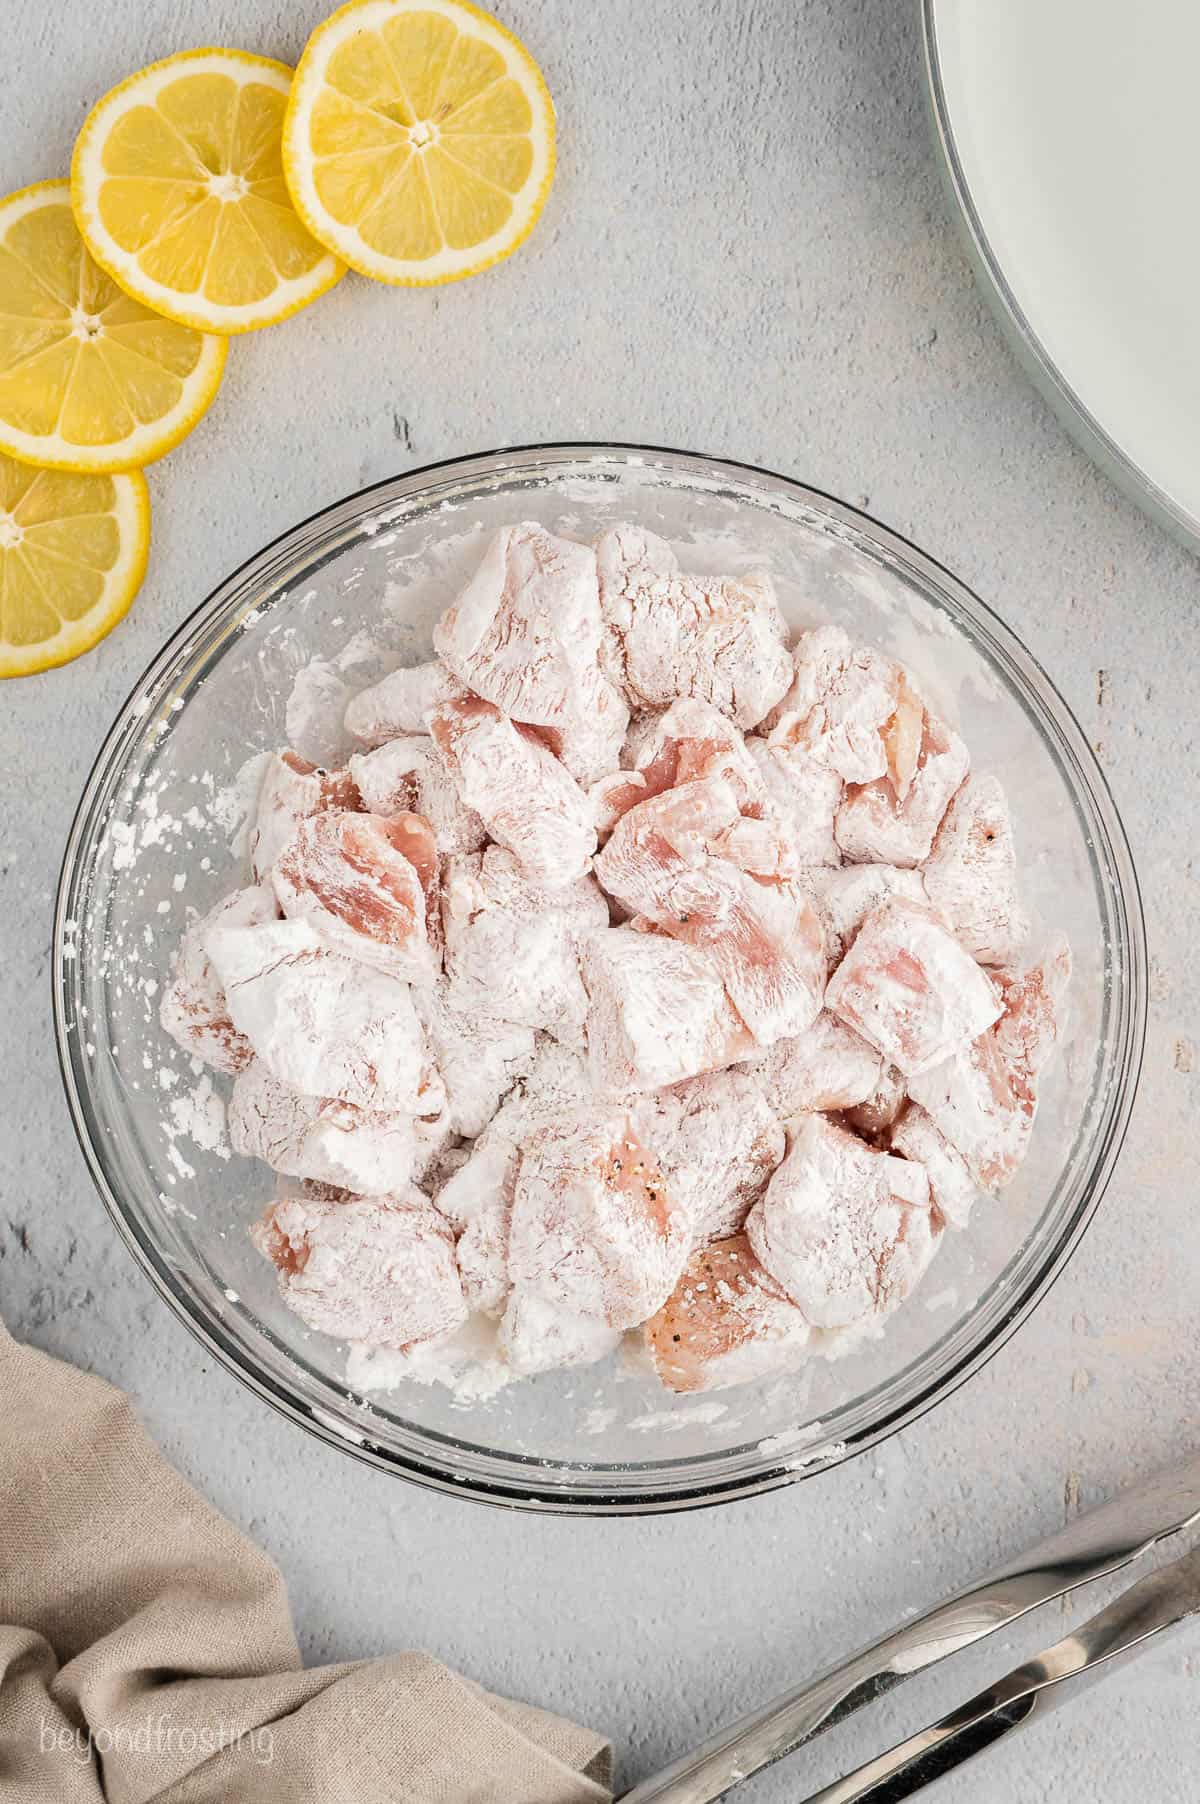 Diced chicken tossed with cornstarch in a glass bowl